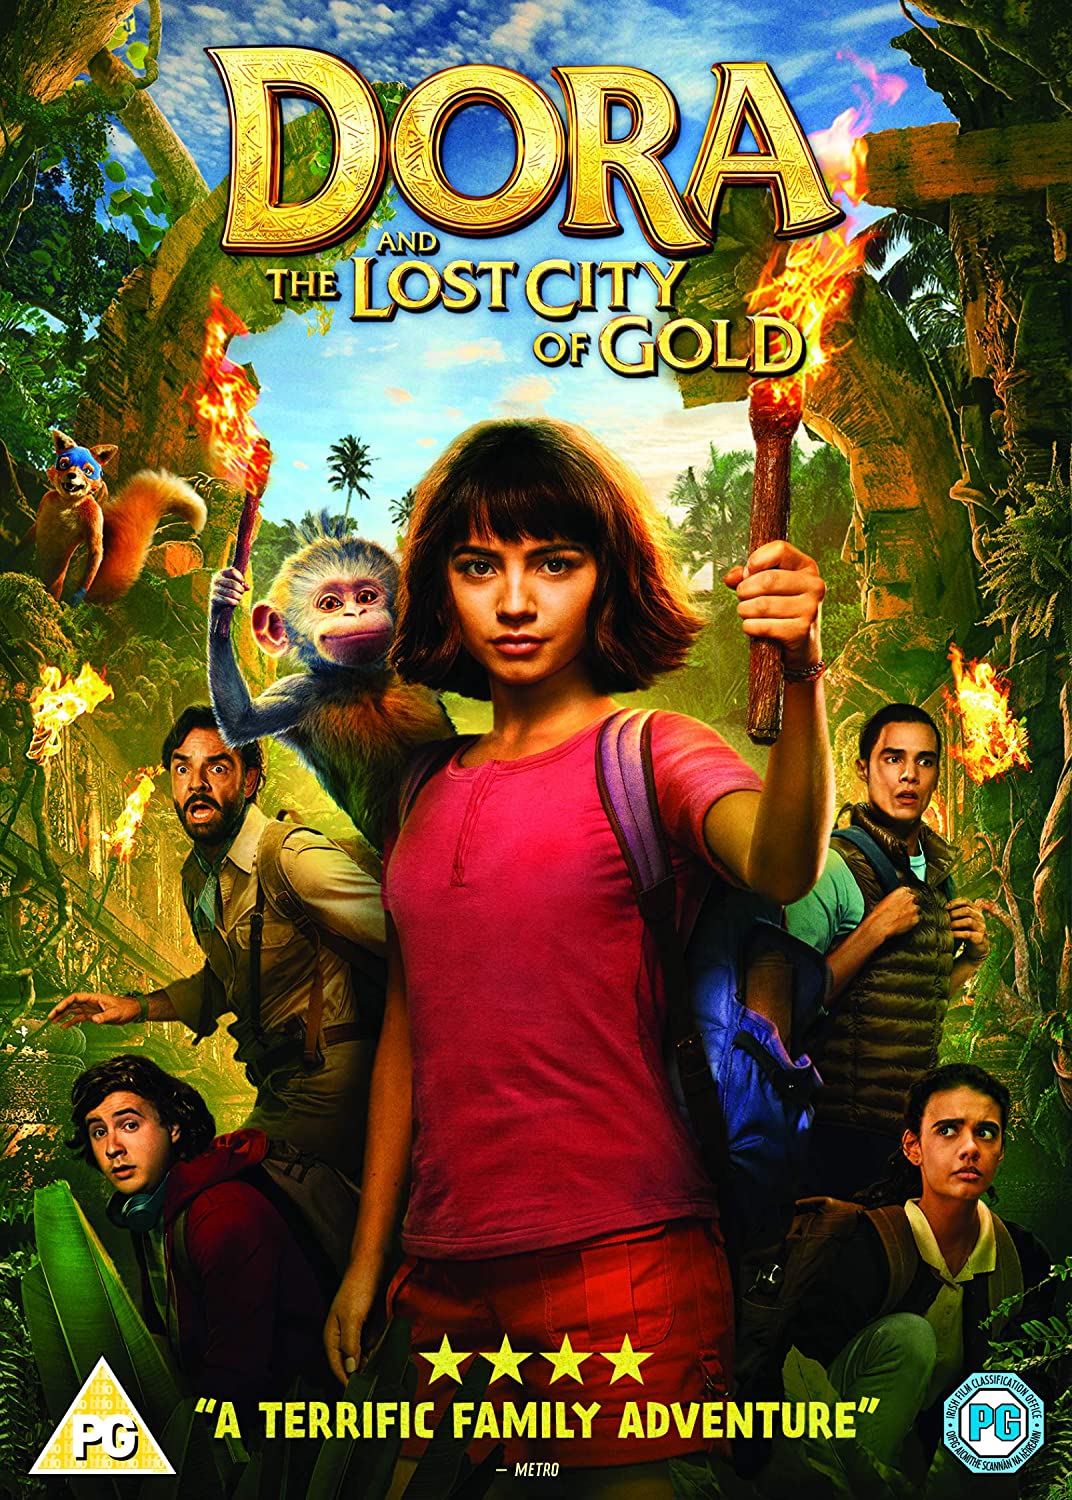 Dora And The Lost City of Gold - Dora The Explorer - Comedy/Action [DVD]